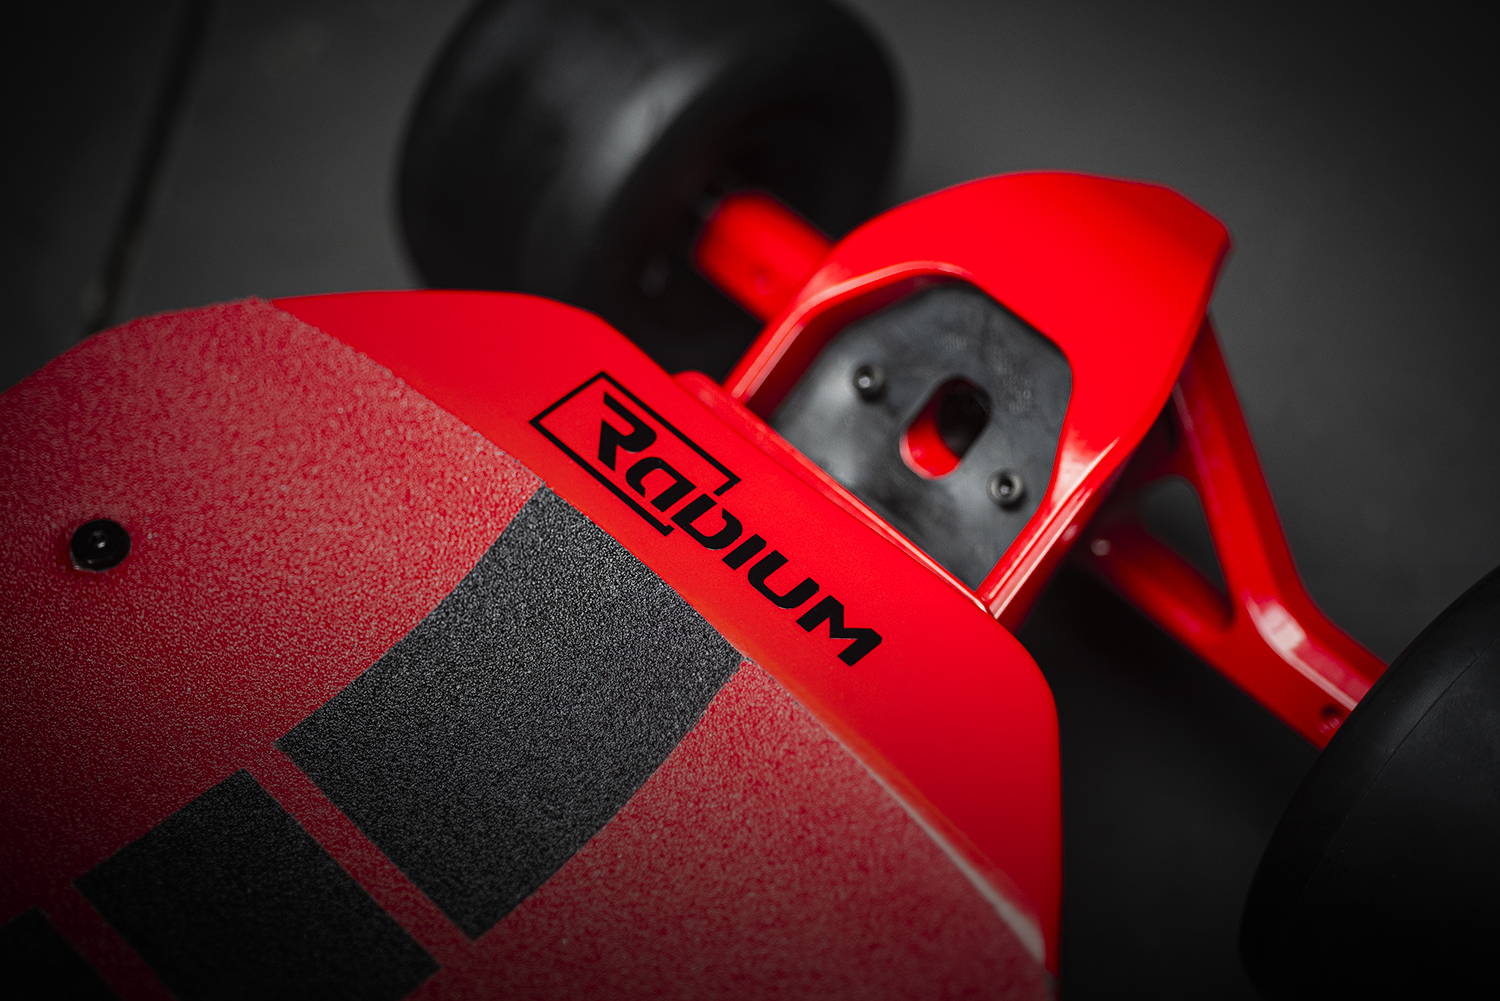 Top perspective view of trucks and wheels and deck Overall perspective view of Radium Performance Mach One XP3 Electric Skateboard